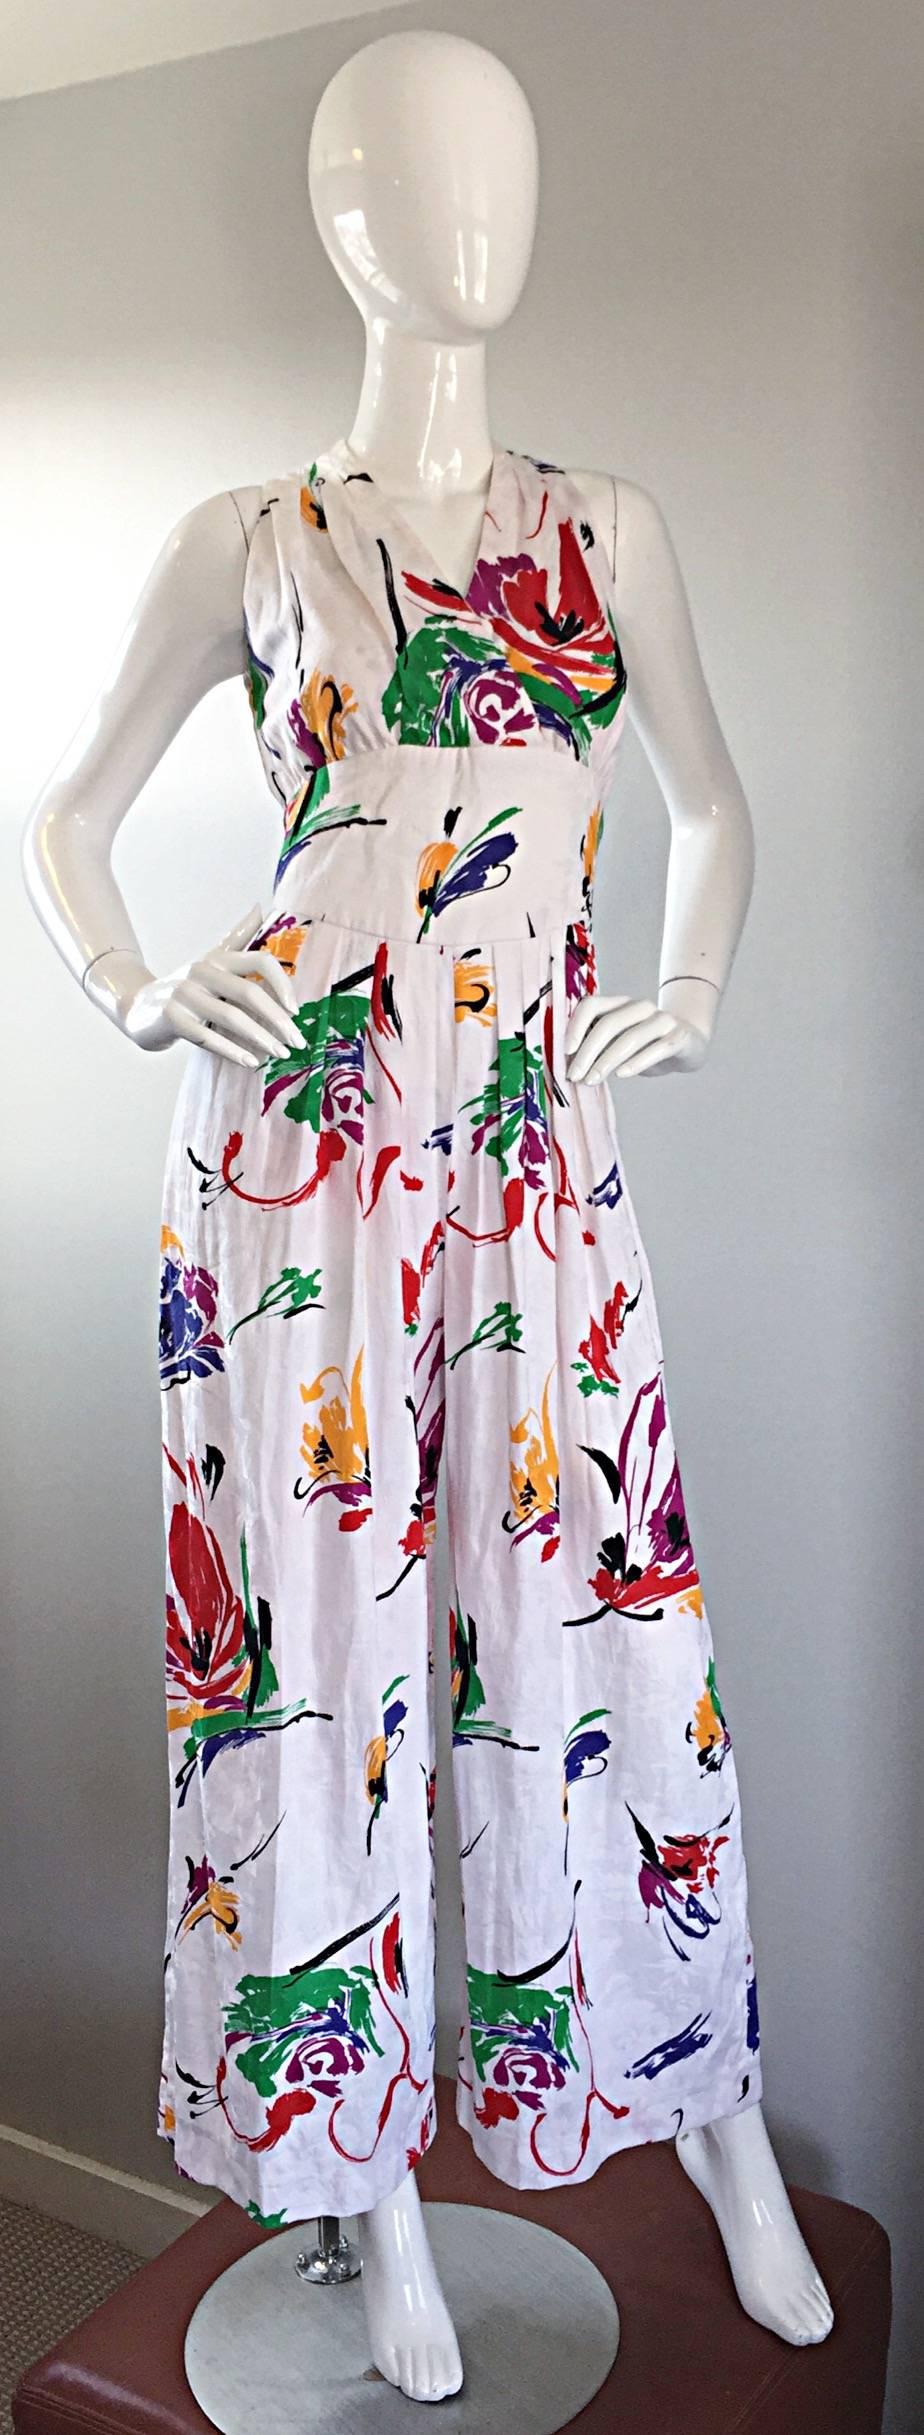 Amazing vintage RONNIE HELLER for BULLOCKS WILSHIRE white cotton halter jumpsuit! Awesome abstract designs that almost look like splatter paint. Wide palazzo legs, with a fitted bodice. Ties closed at back top neck. Pockets at both sides of the